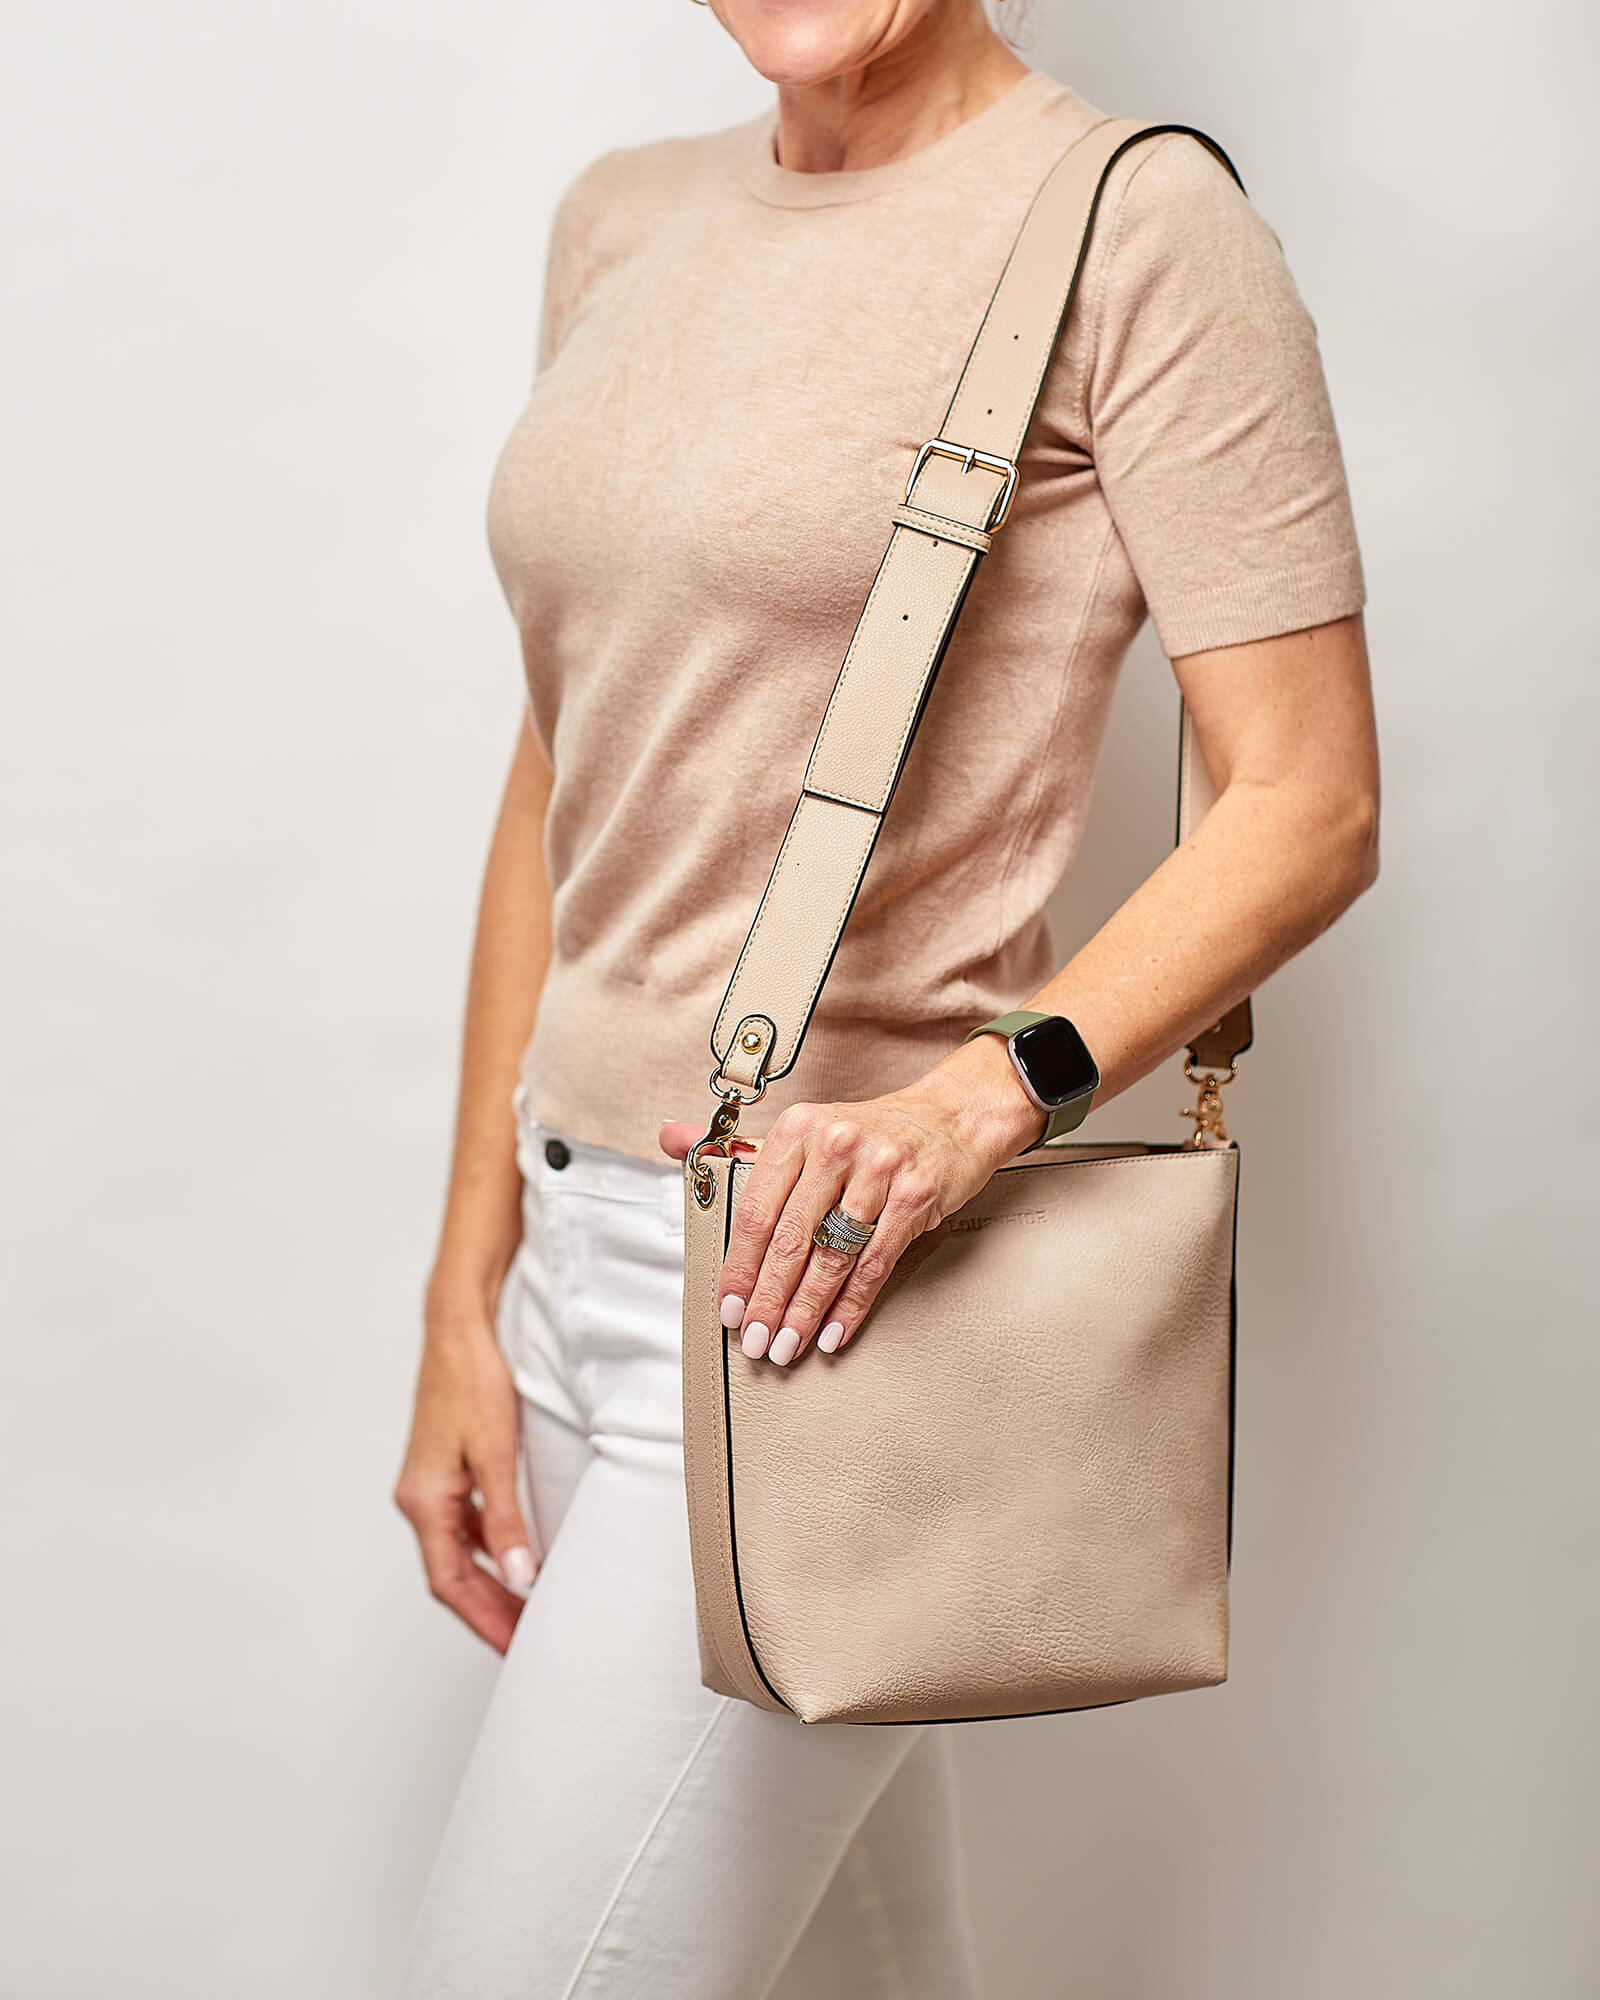 Louenhide Charlie Bag - Putty Accessories - Other Accessories - Handbags & Wallets by Louenhide | Grace the Boutique